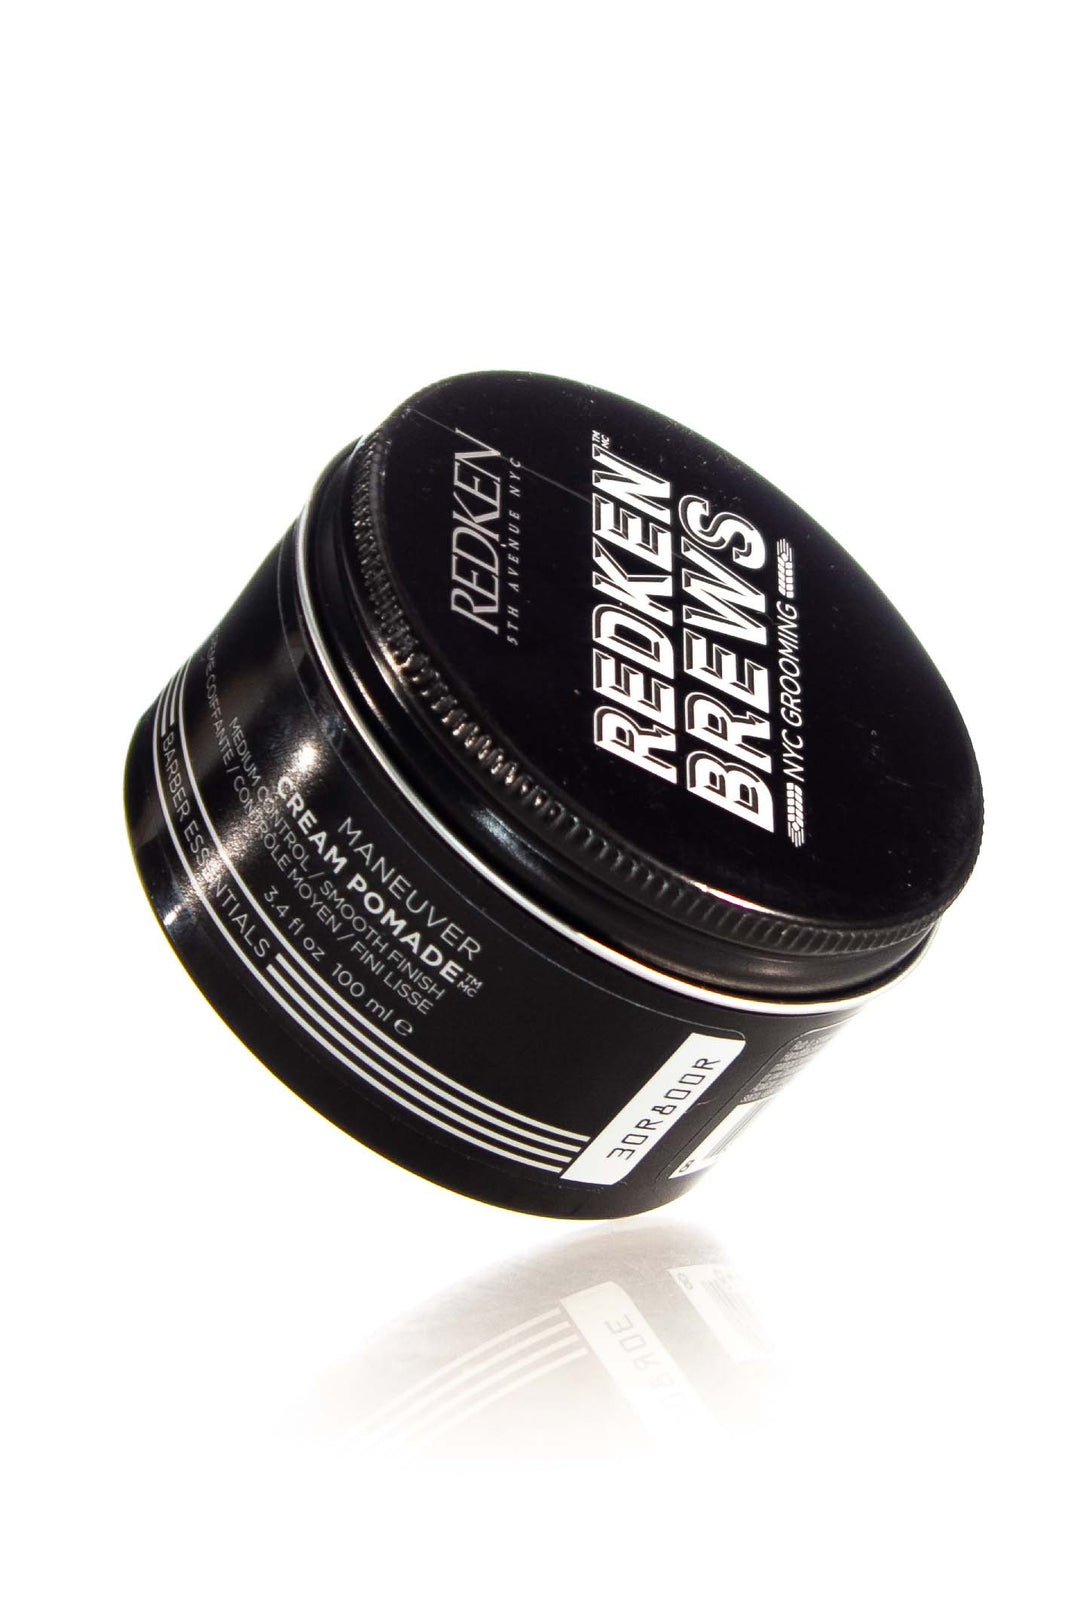 Add smoothness and hold to men's hairstyles with this water-based pomade for men